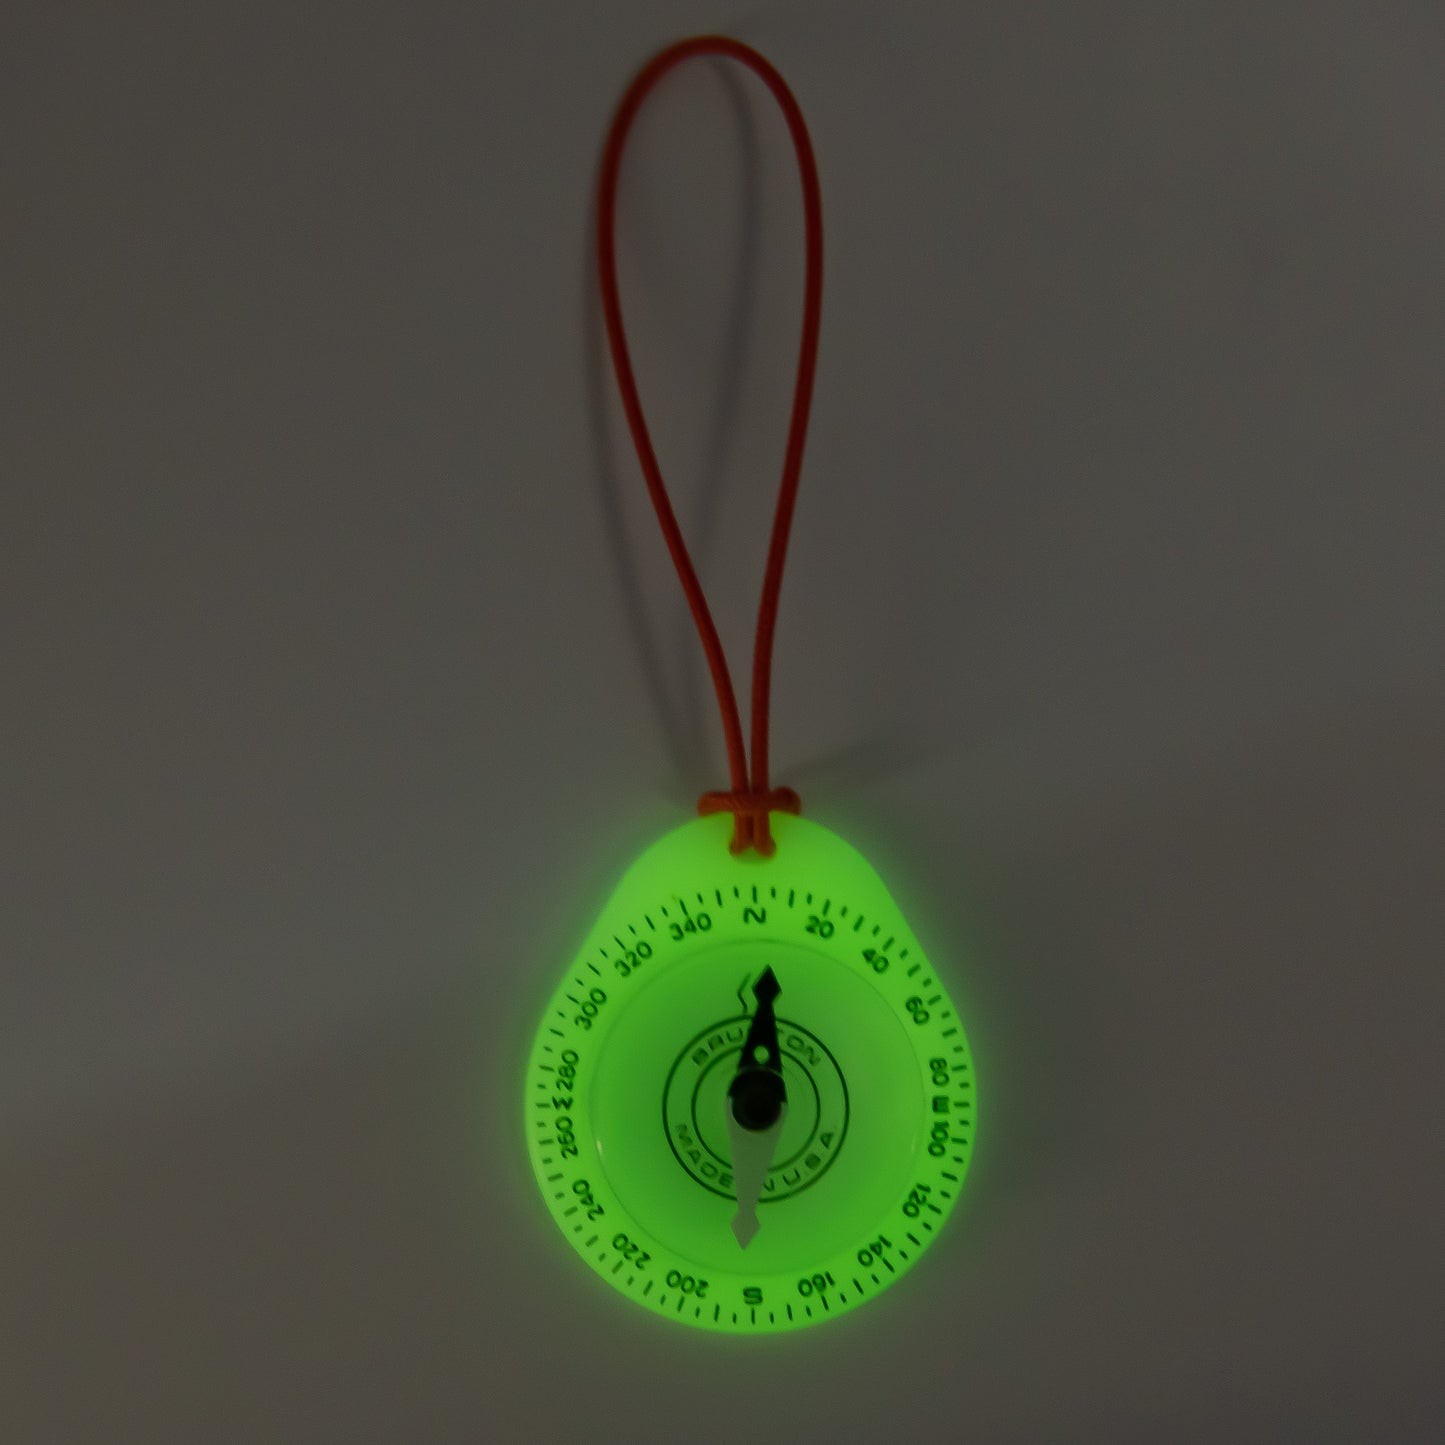 Tag-Along 9041 Glow Compass